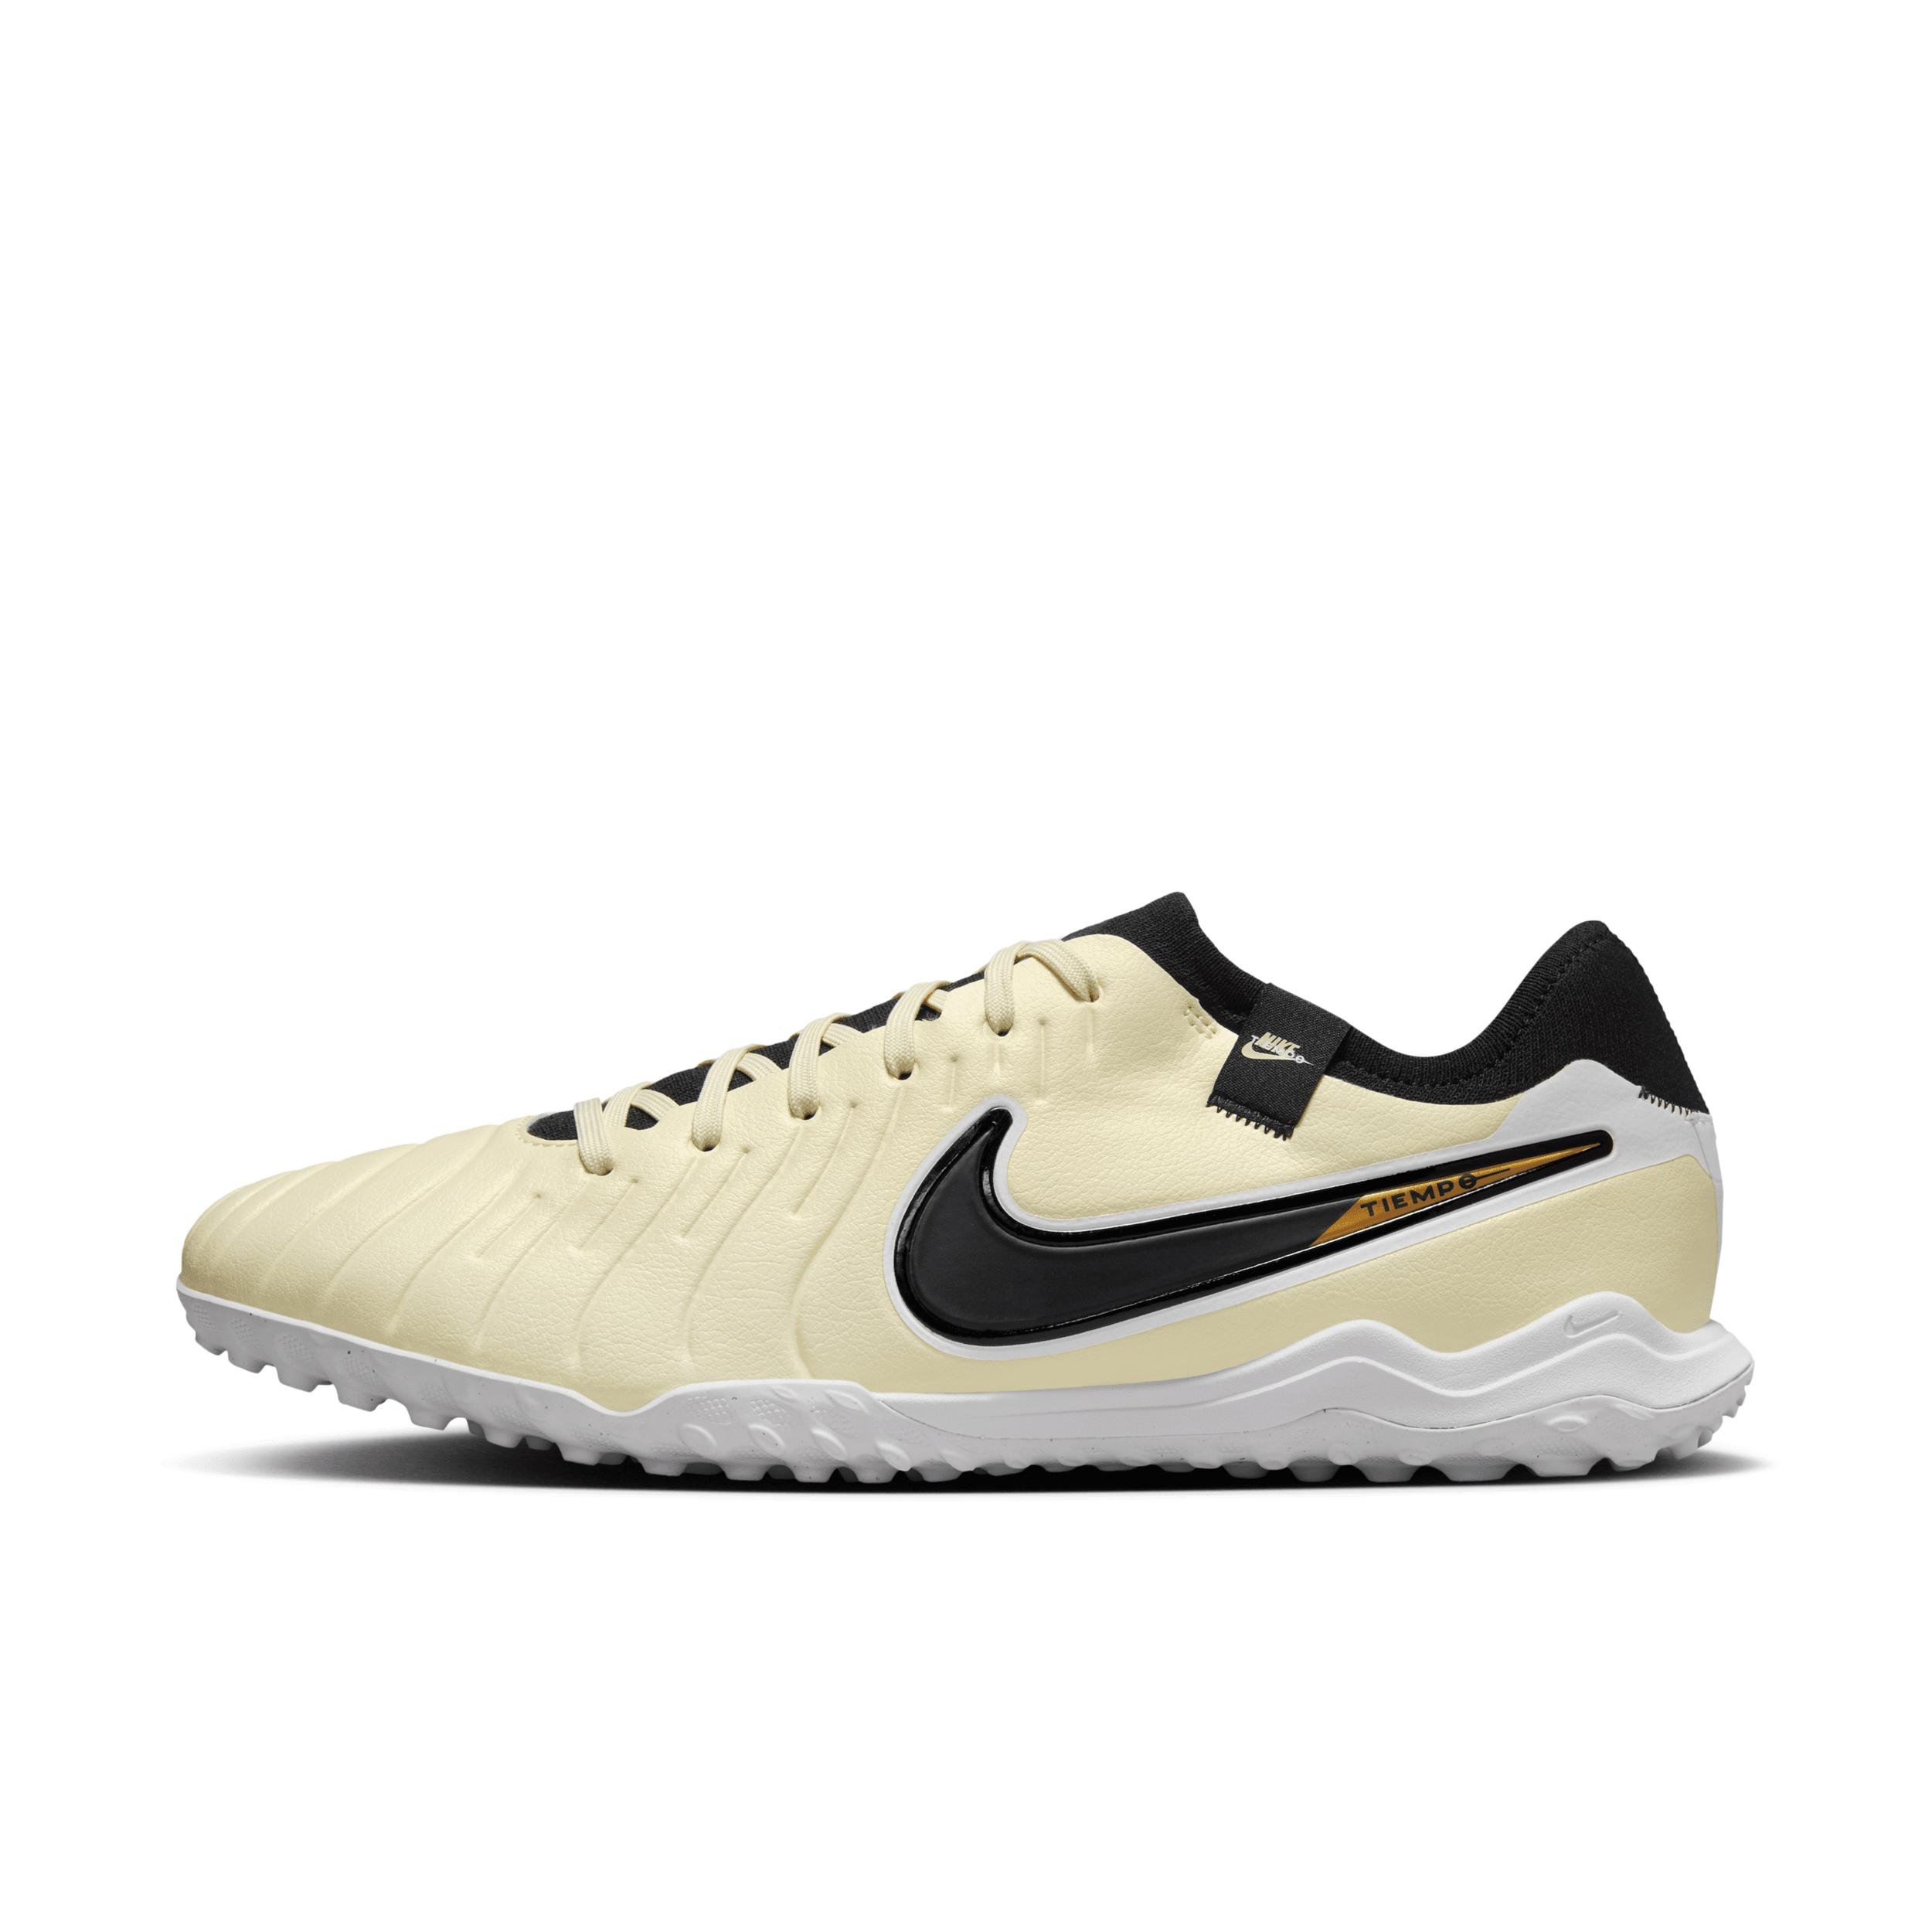 Nike Men's Tiempo Legend 10 Pro Turf Low-Top Soccer Shoes by NIKE